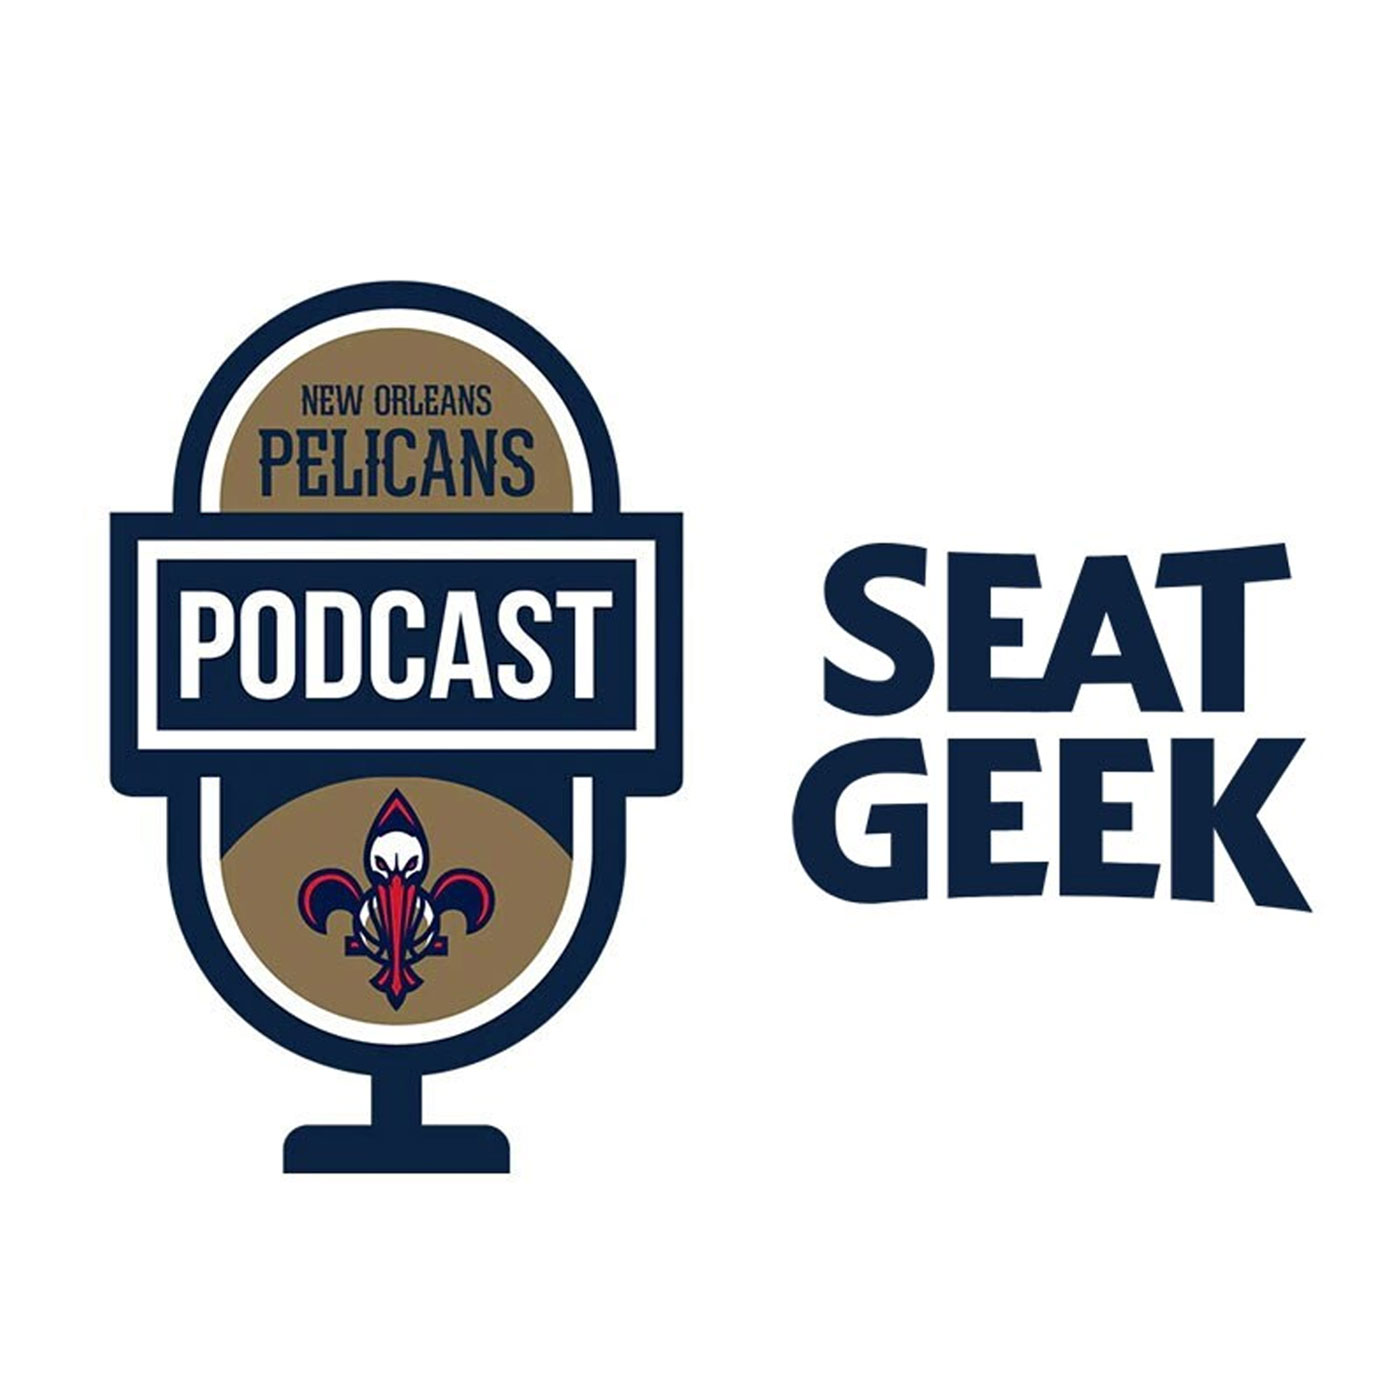 Brian Lewis on the New Orleans Pelicans Podcast presented by SeatGeek - November 12, 2021